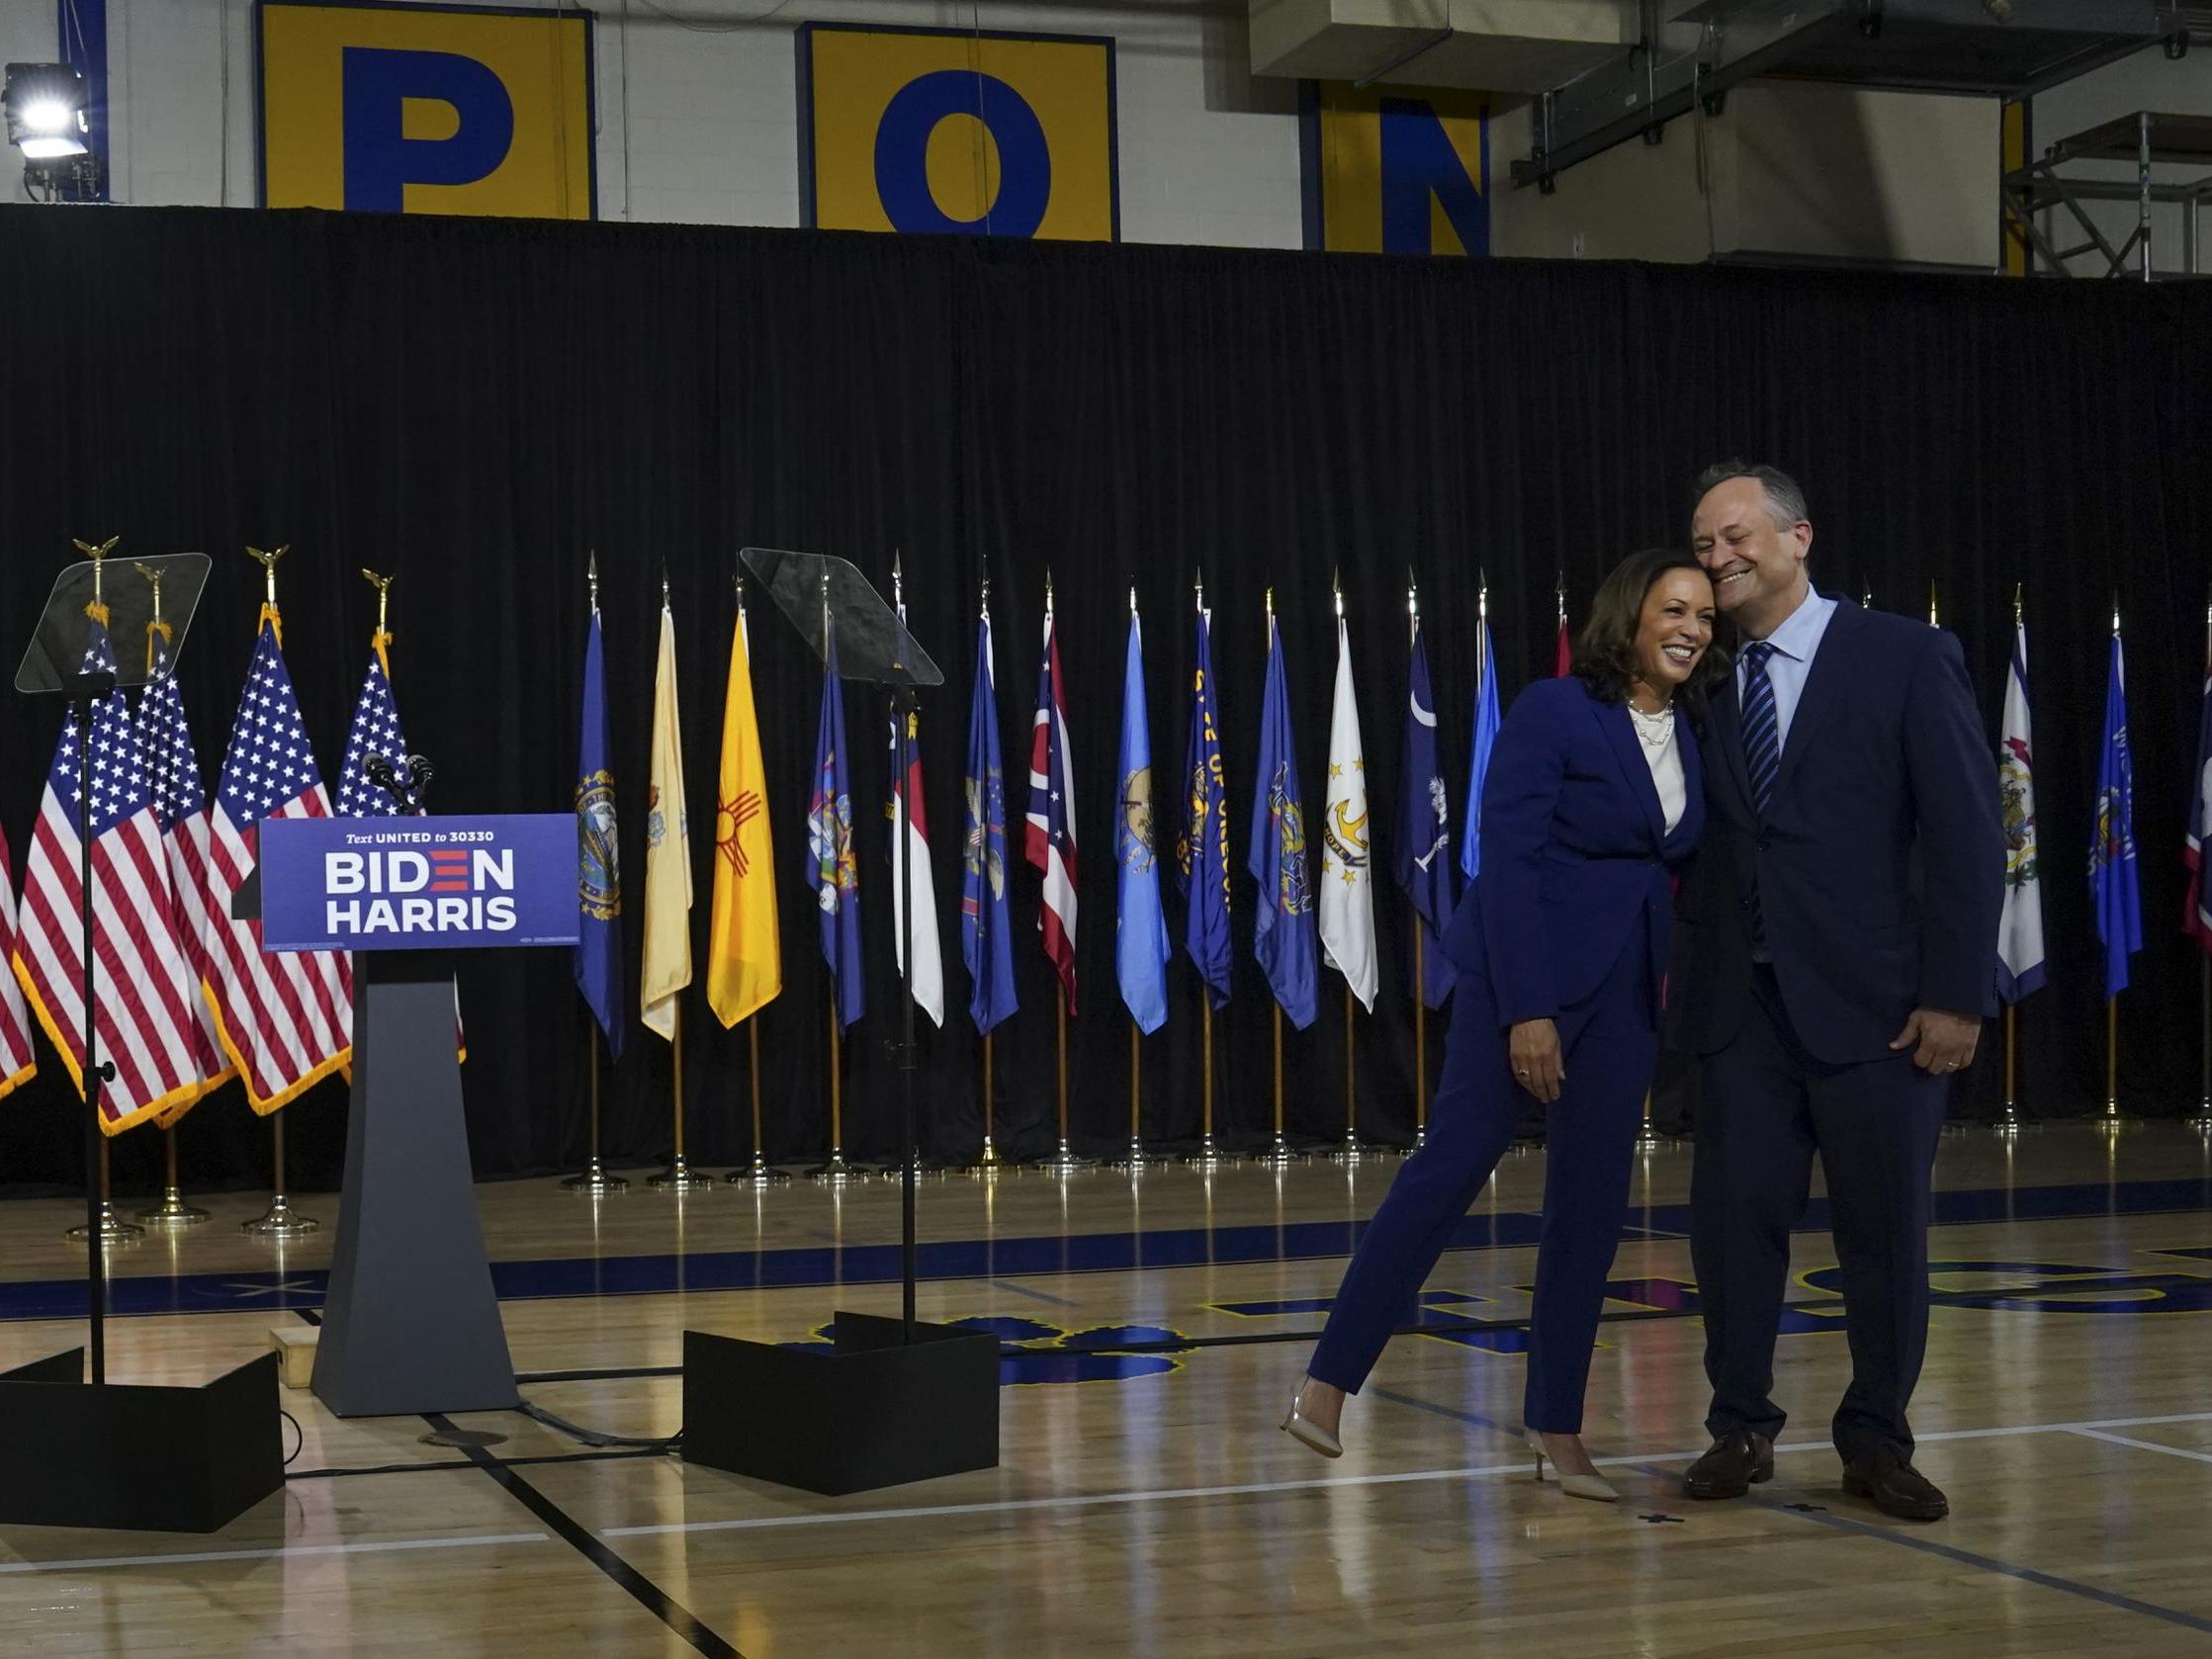 Senator Kamala Harris leans on husband Doug Emhoff after being introduced by Joe Biden as his running mate during an event in Wilmington